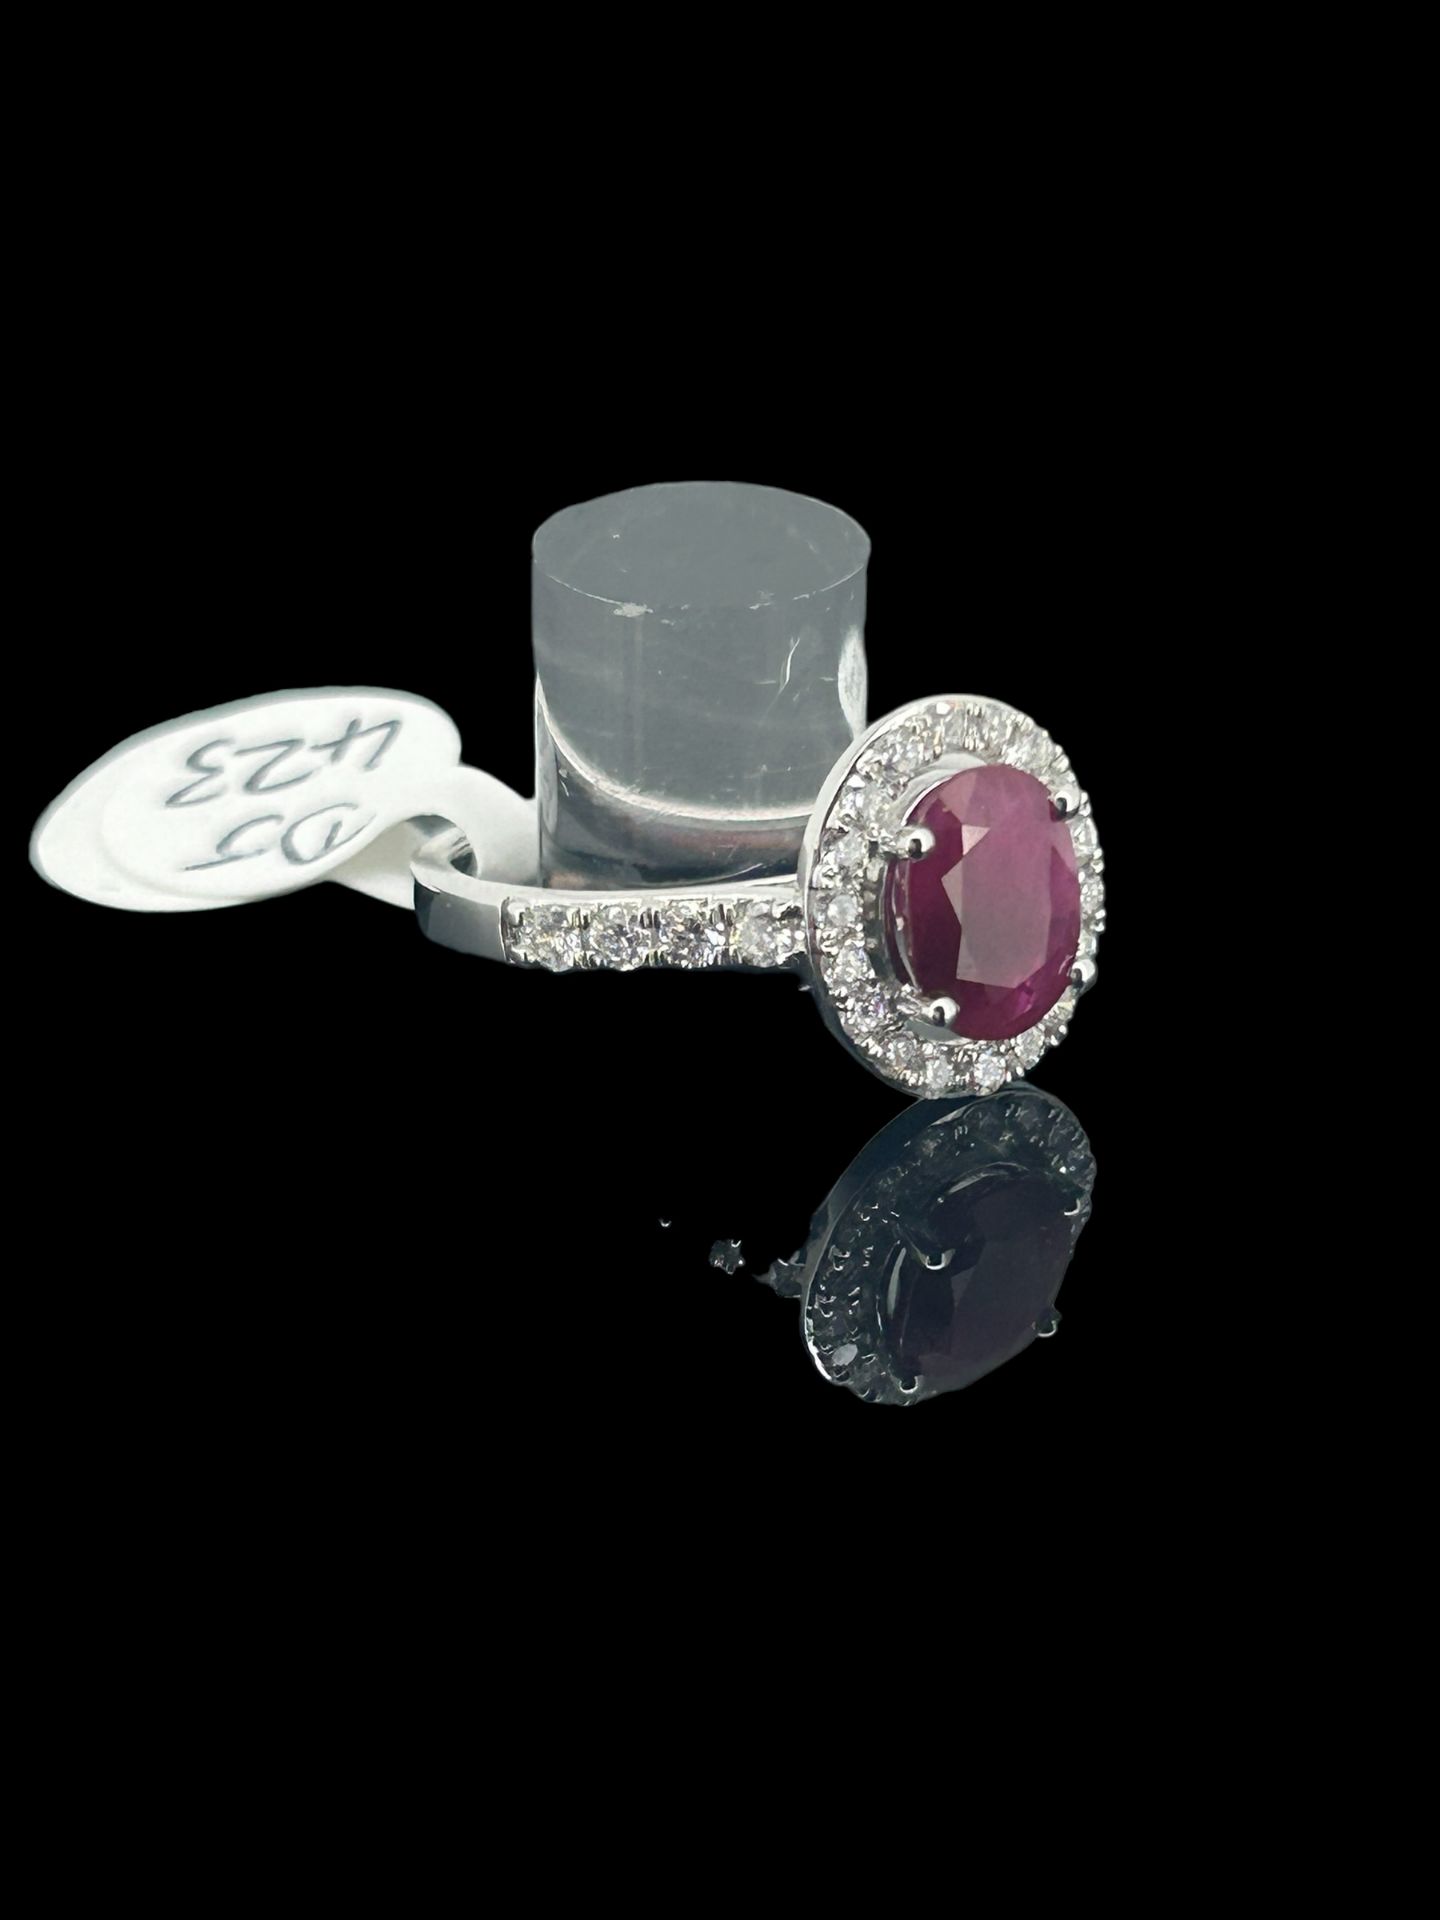 9 carat white gold diamond and ruby ring - Image 2 of 2